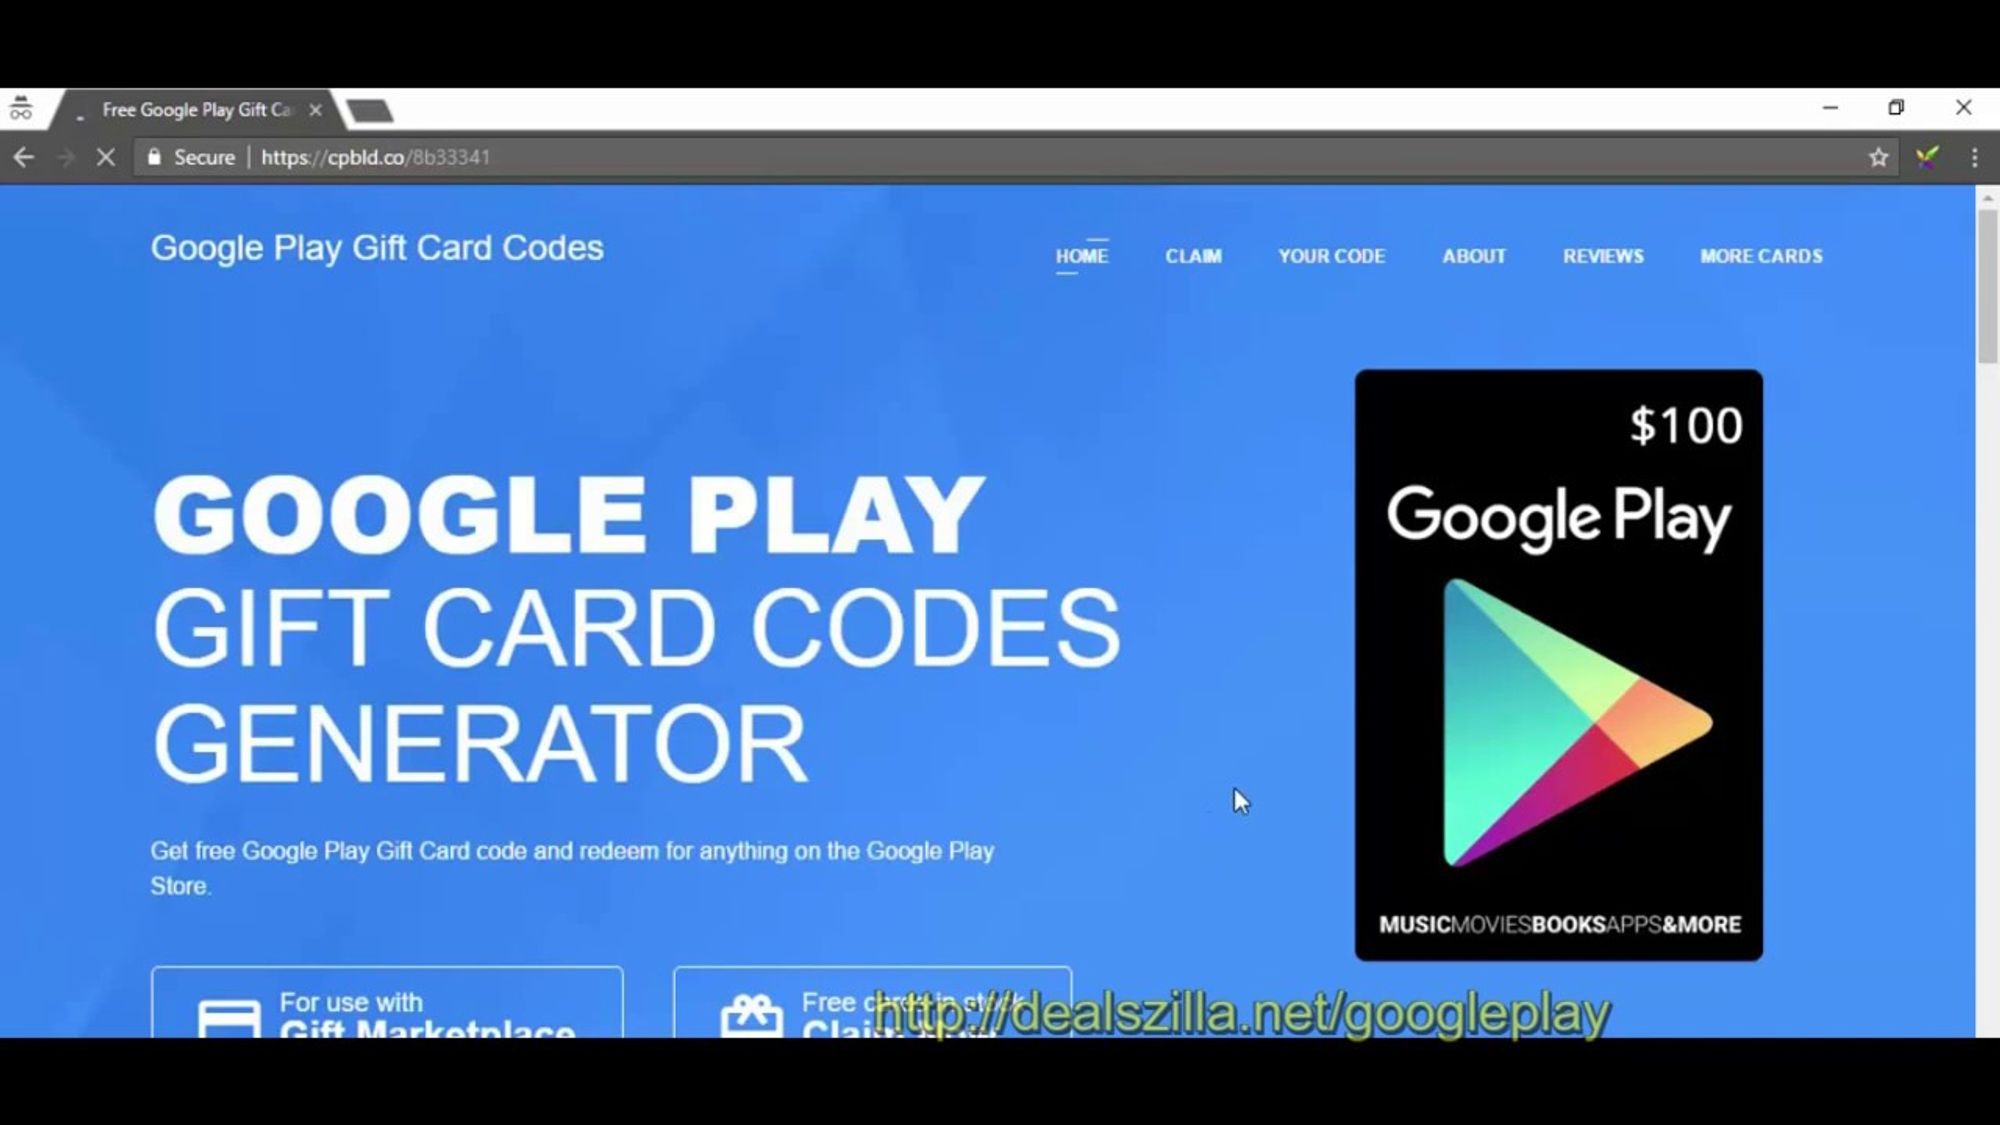 Free Google Play Redeem Codes Google Play Free Gift Cards And